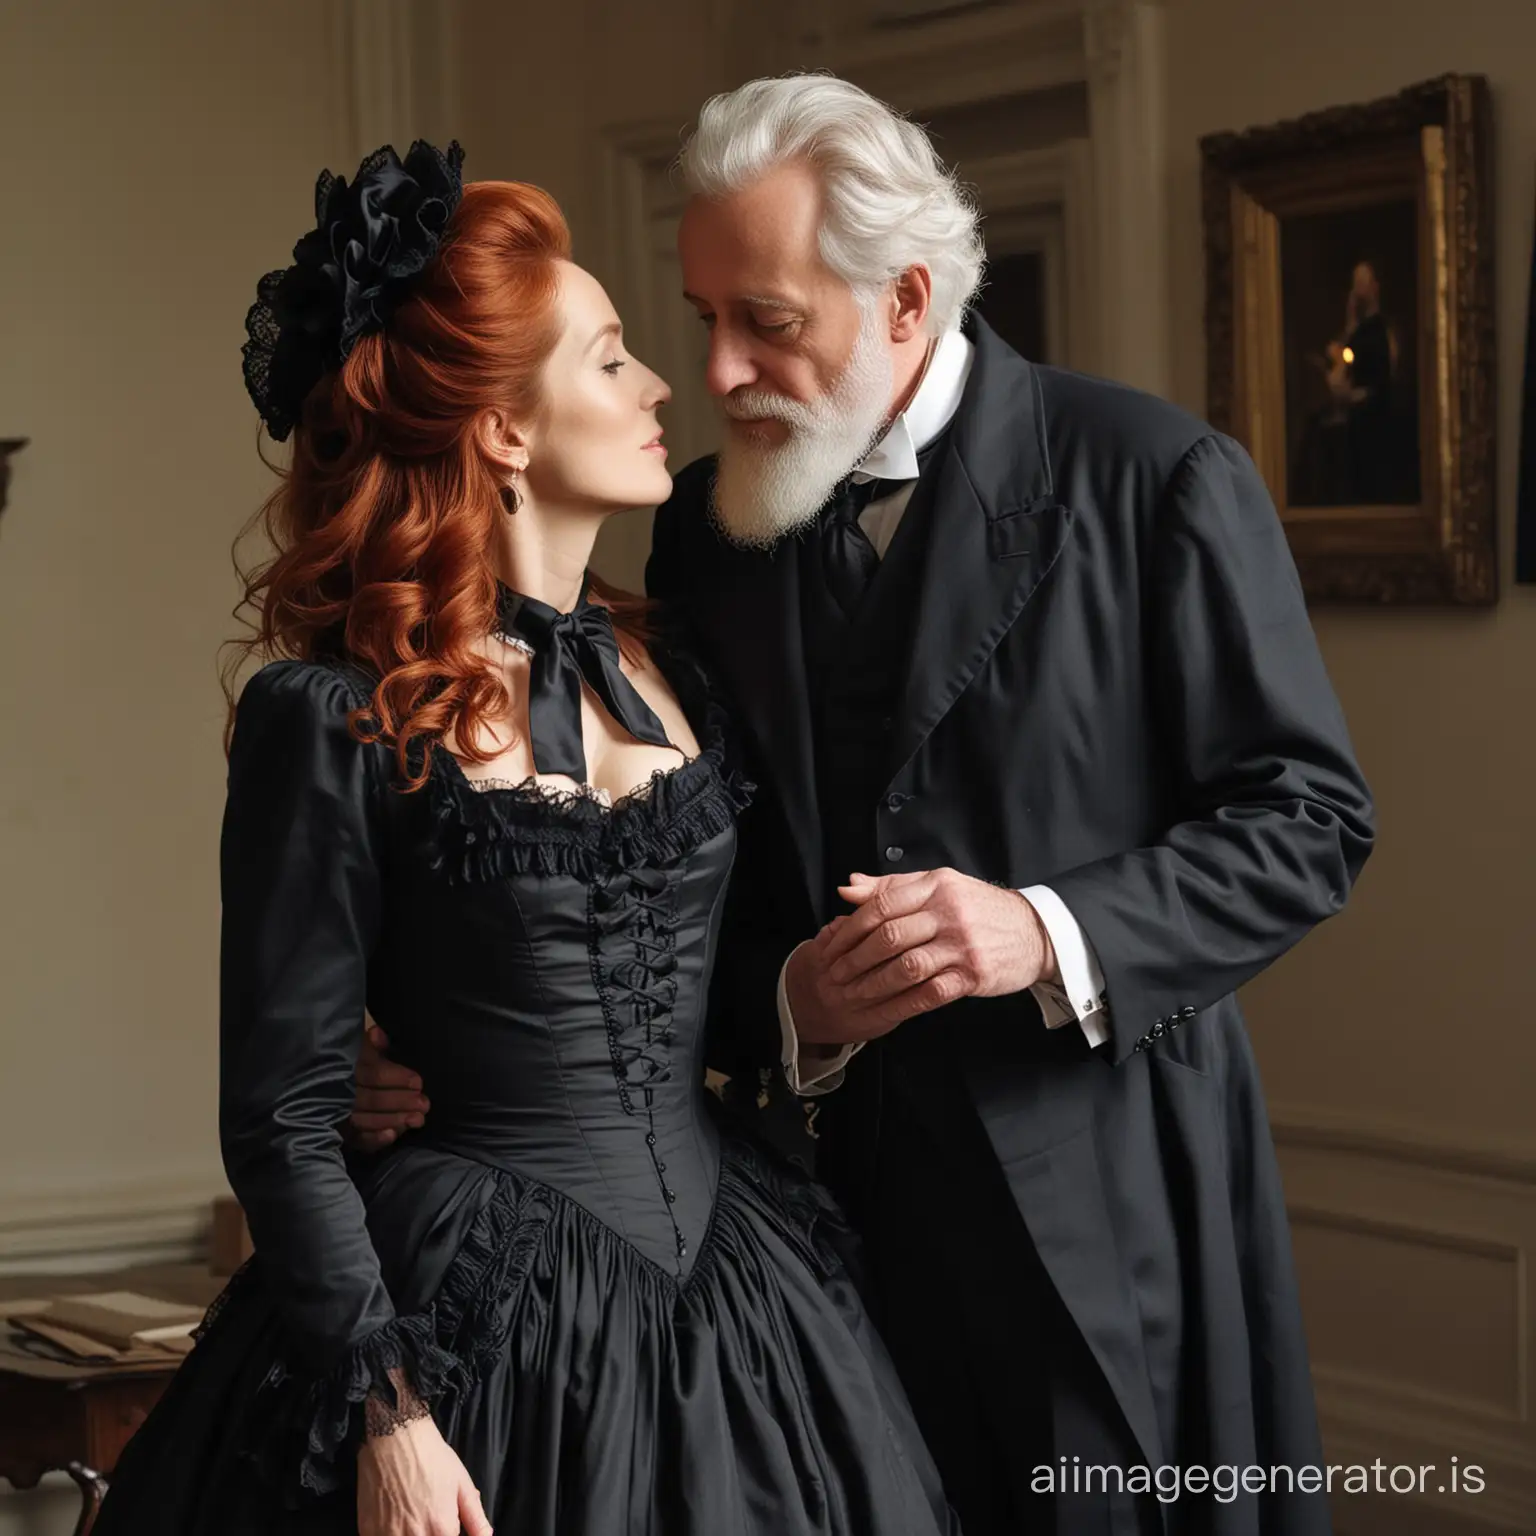 red hair Gillian Anderson wearing a black floor-length loose billowing 1860 victorian crinoline dress with  a frilly bonnet kissing an old man who seems to be her newlywed husband